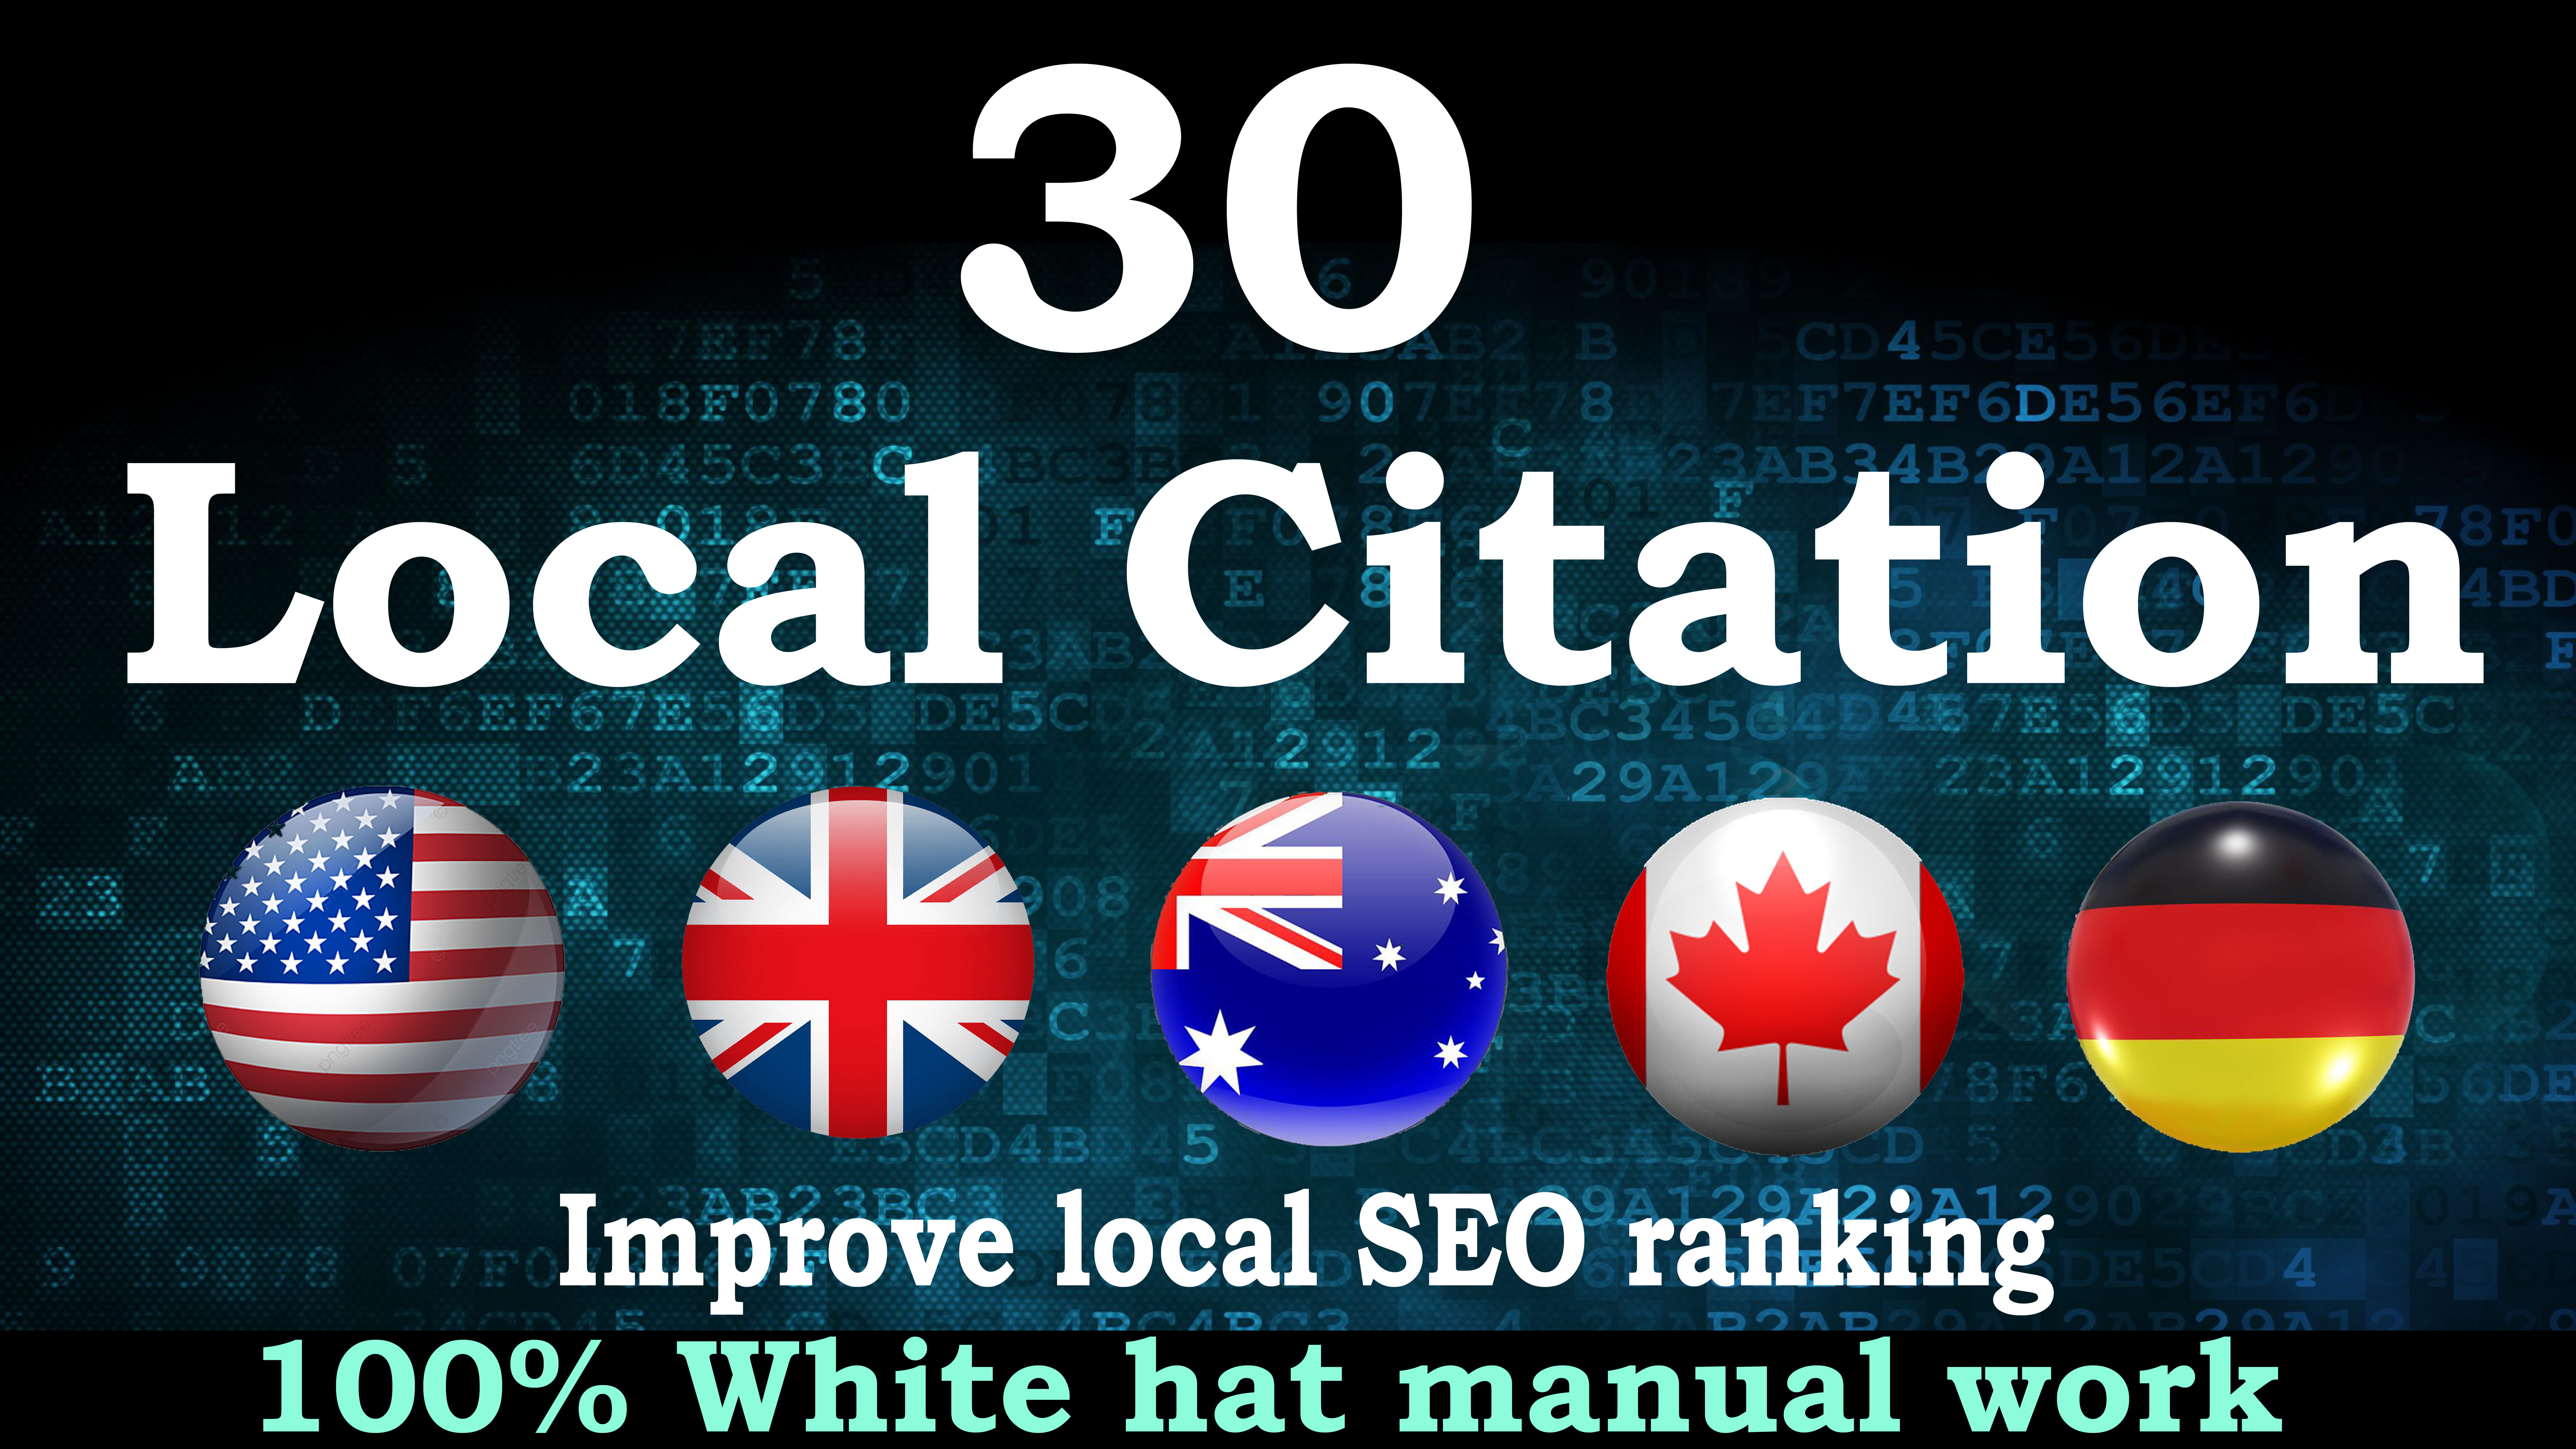 Top 30 Live Local SEO Citation For Your Business Listing To Improve Local SEO Ranking